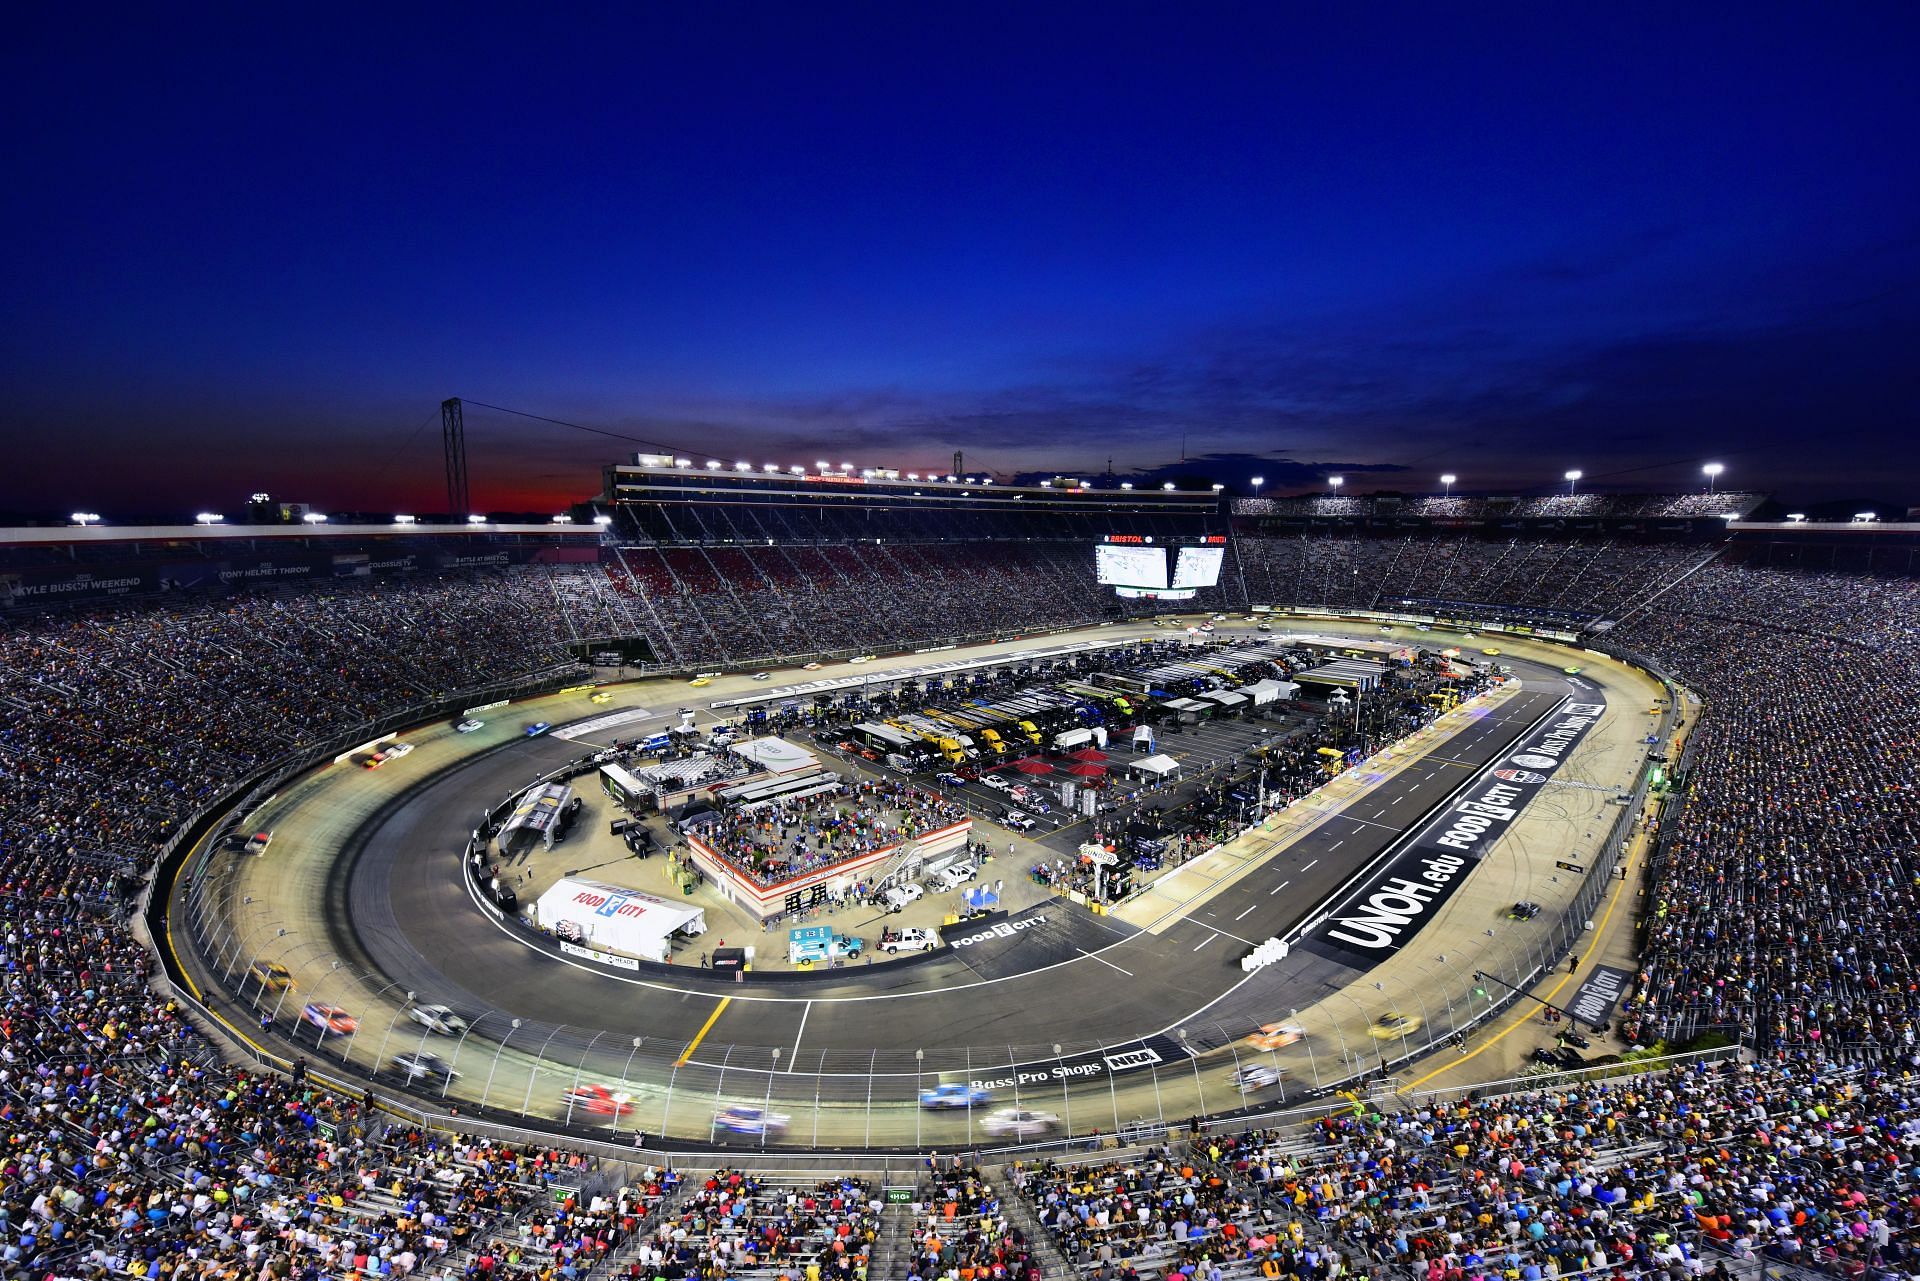 Britstol Motor Speedway during the Monster Energy NASCAR Cup Series Bass Pro Shops NRA Night Race in 2019. (Photo by Jared C. Tilton/Getty Images)